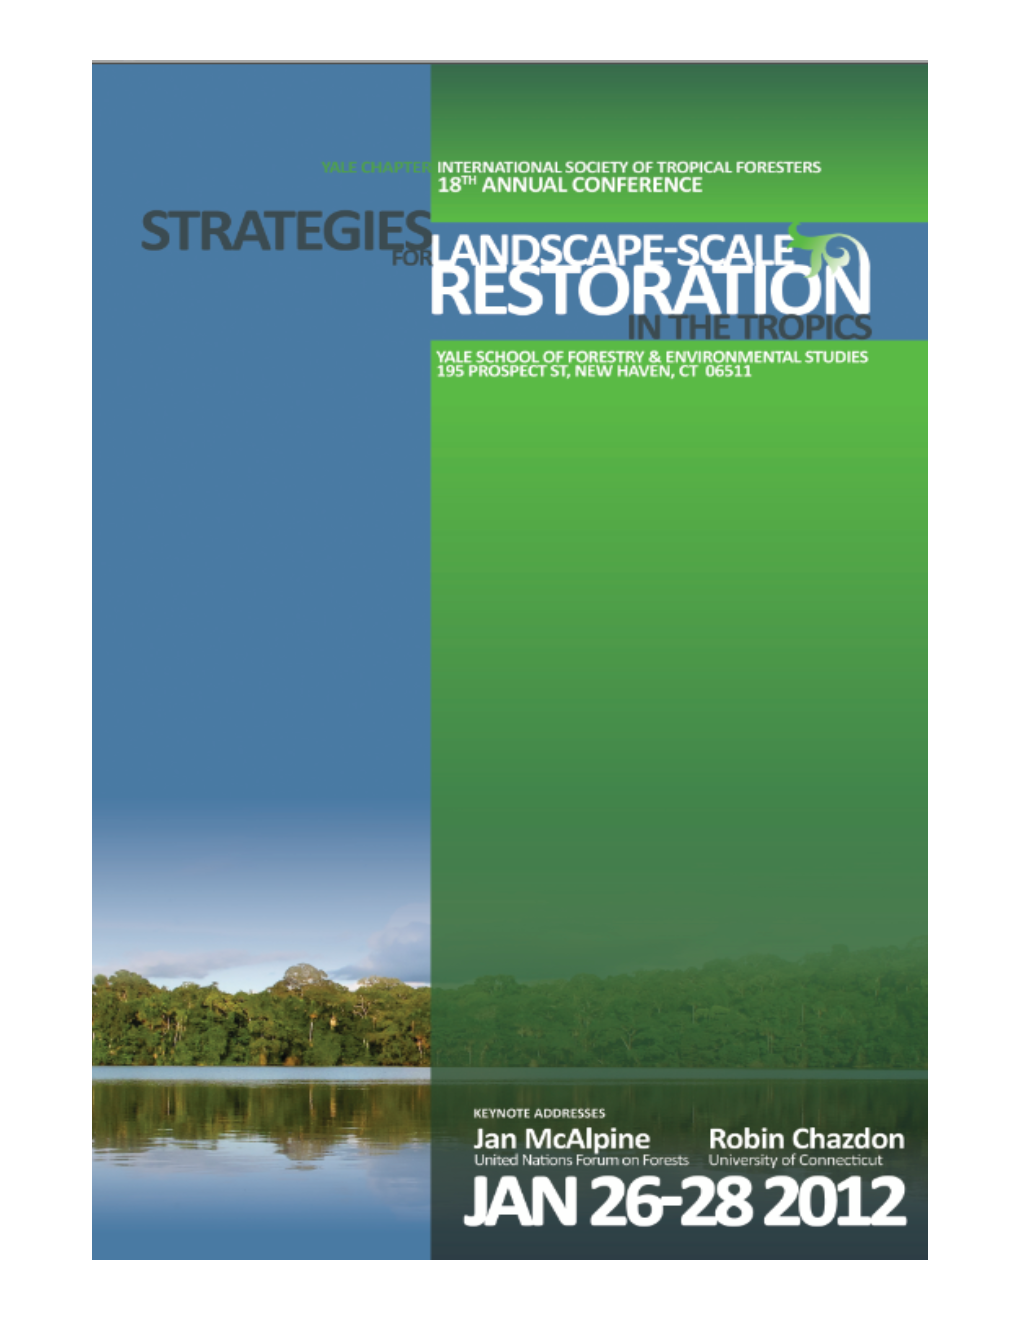 Strategies for Landscape-Scale Restoration in the Tropics